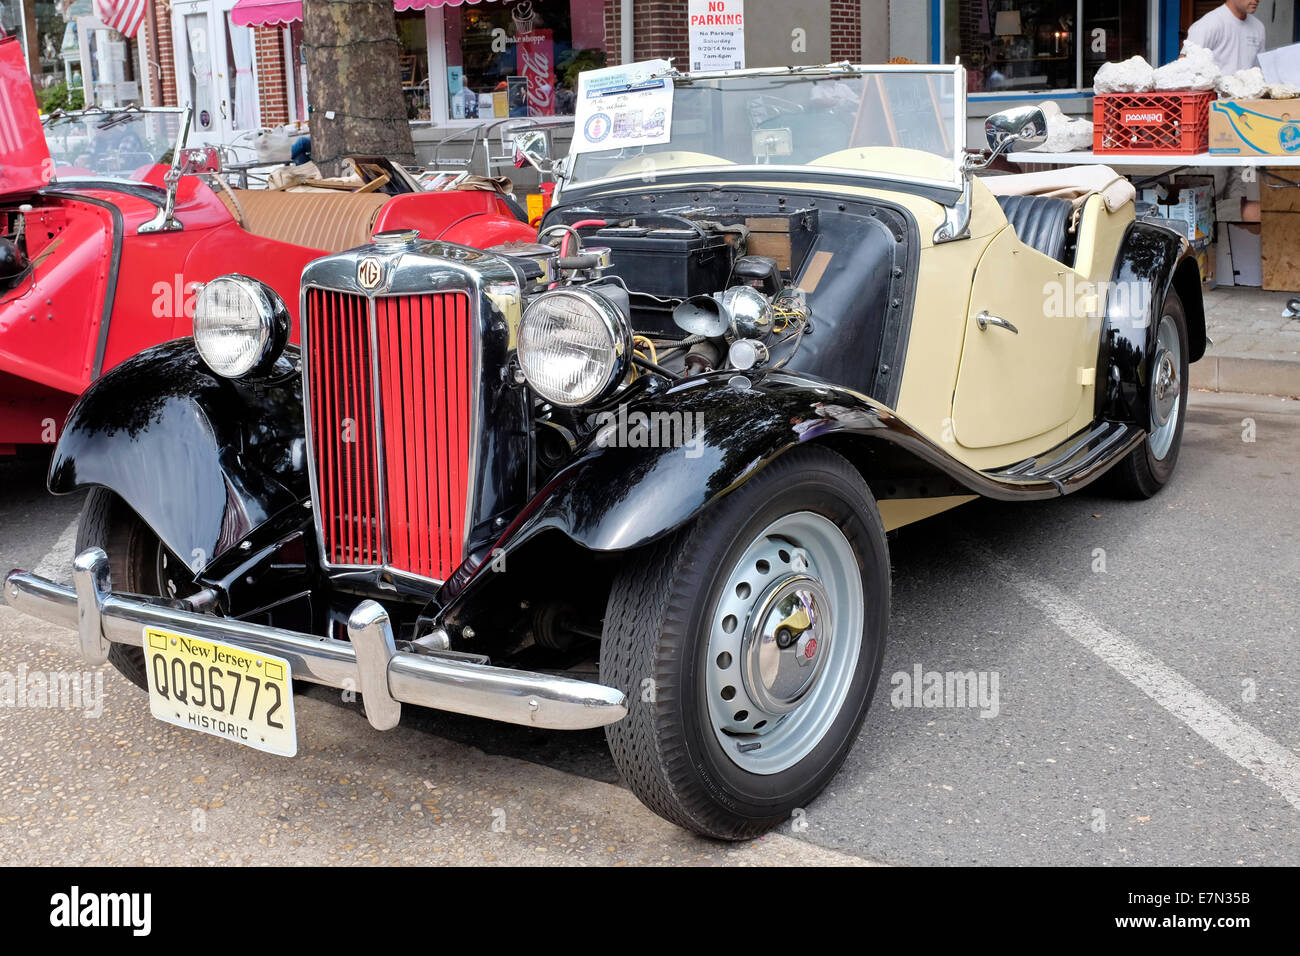 Vintage MG automobile at the Brits on the beach car show at Ocean Grove New Jersey Stock Photo